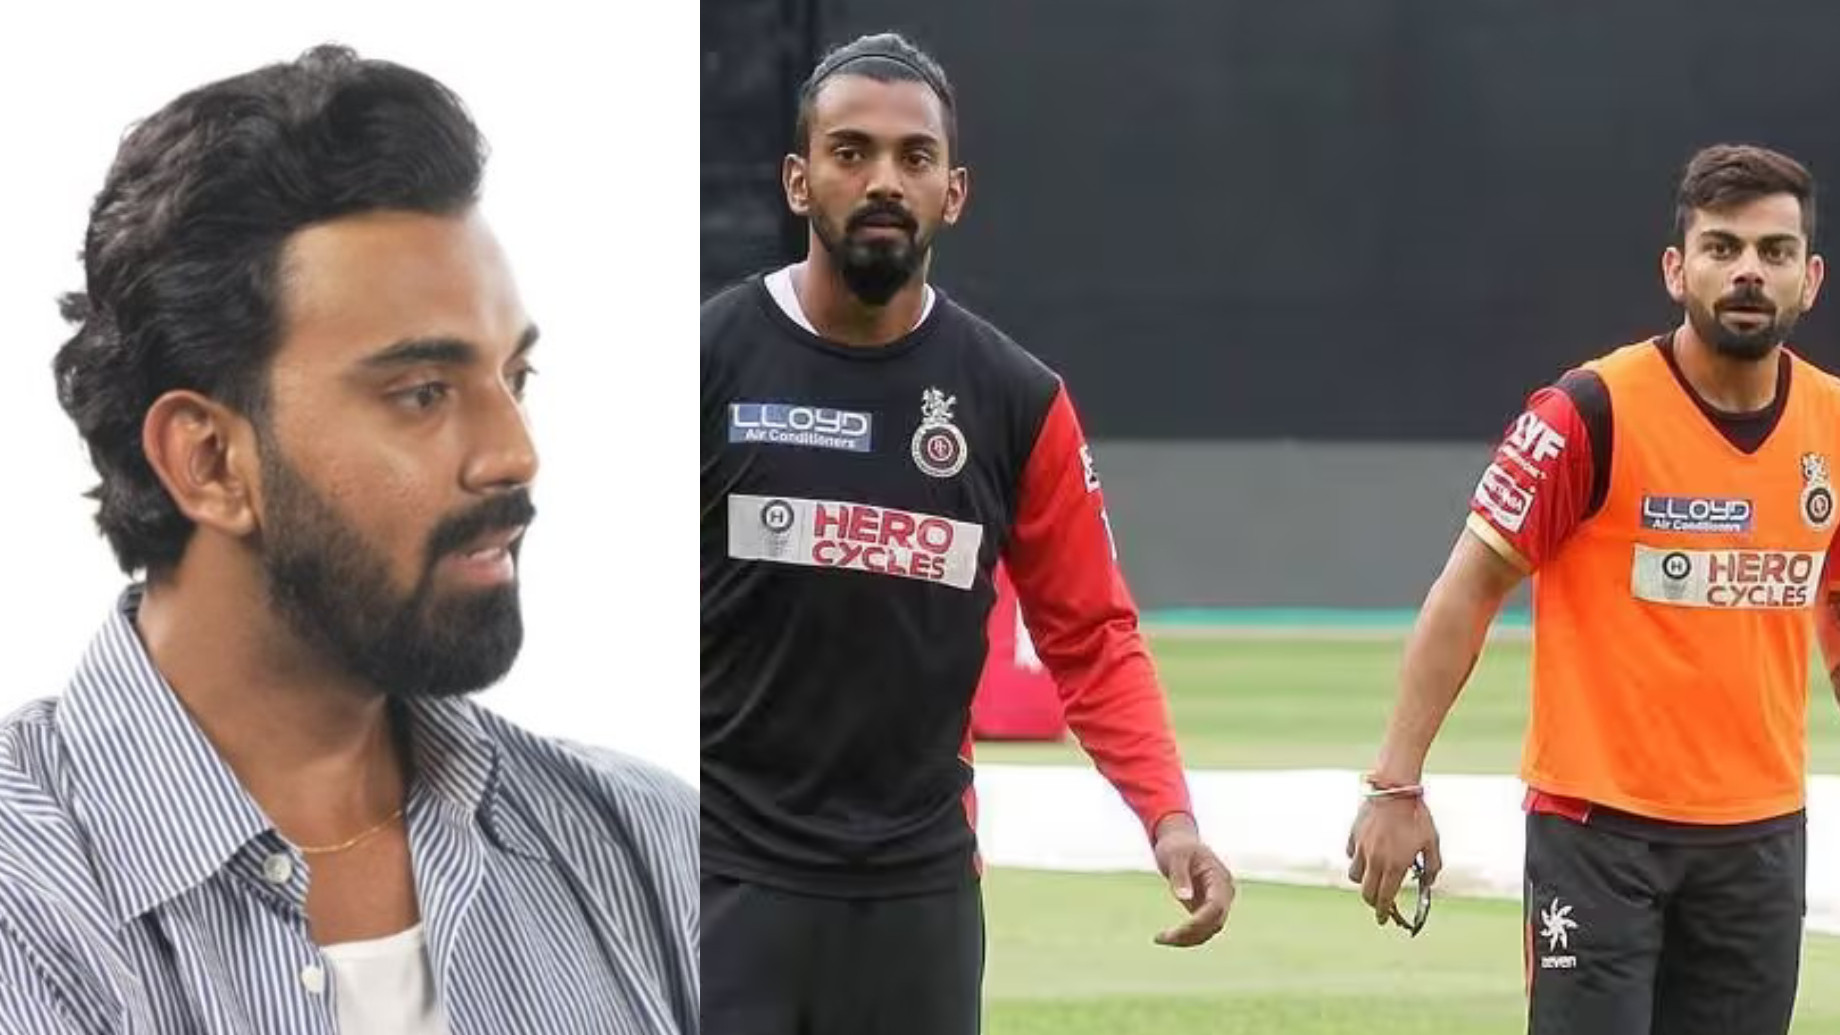 “It's not an option, just sign this contract”- KL Rahul recalls Virat Kohli’s words when he joined RCB in 2013